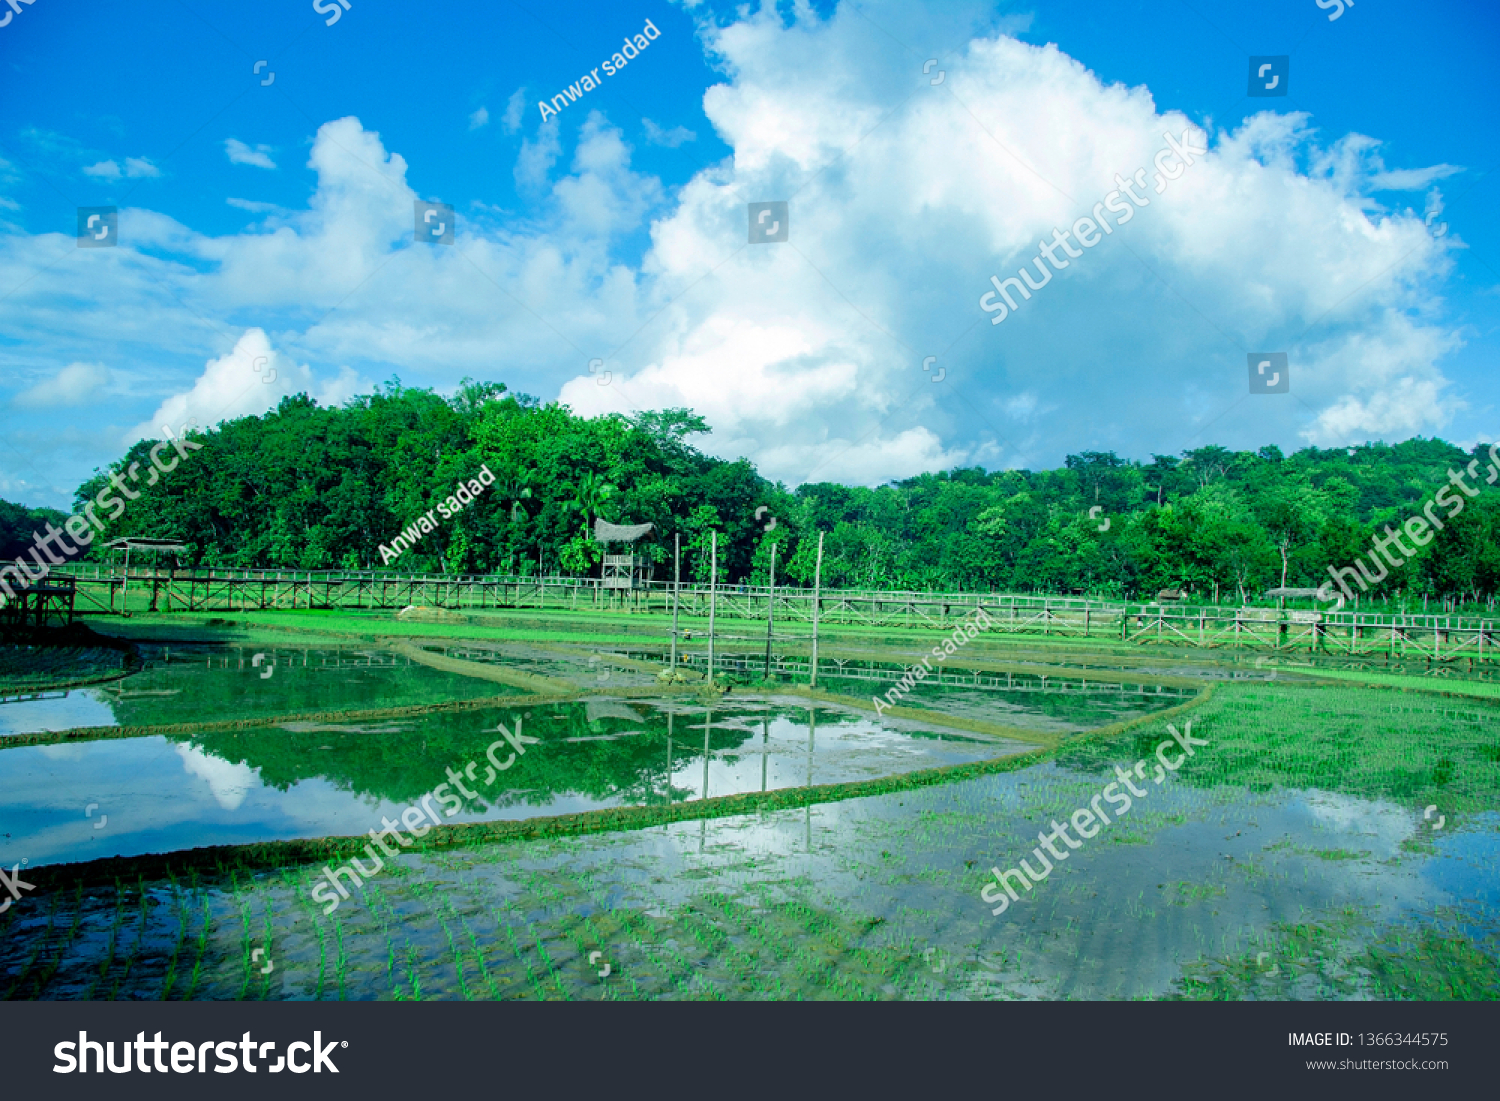 sukorame rice field, rice field in the morning, Paddy fields with new seedlings #1366344575